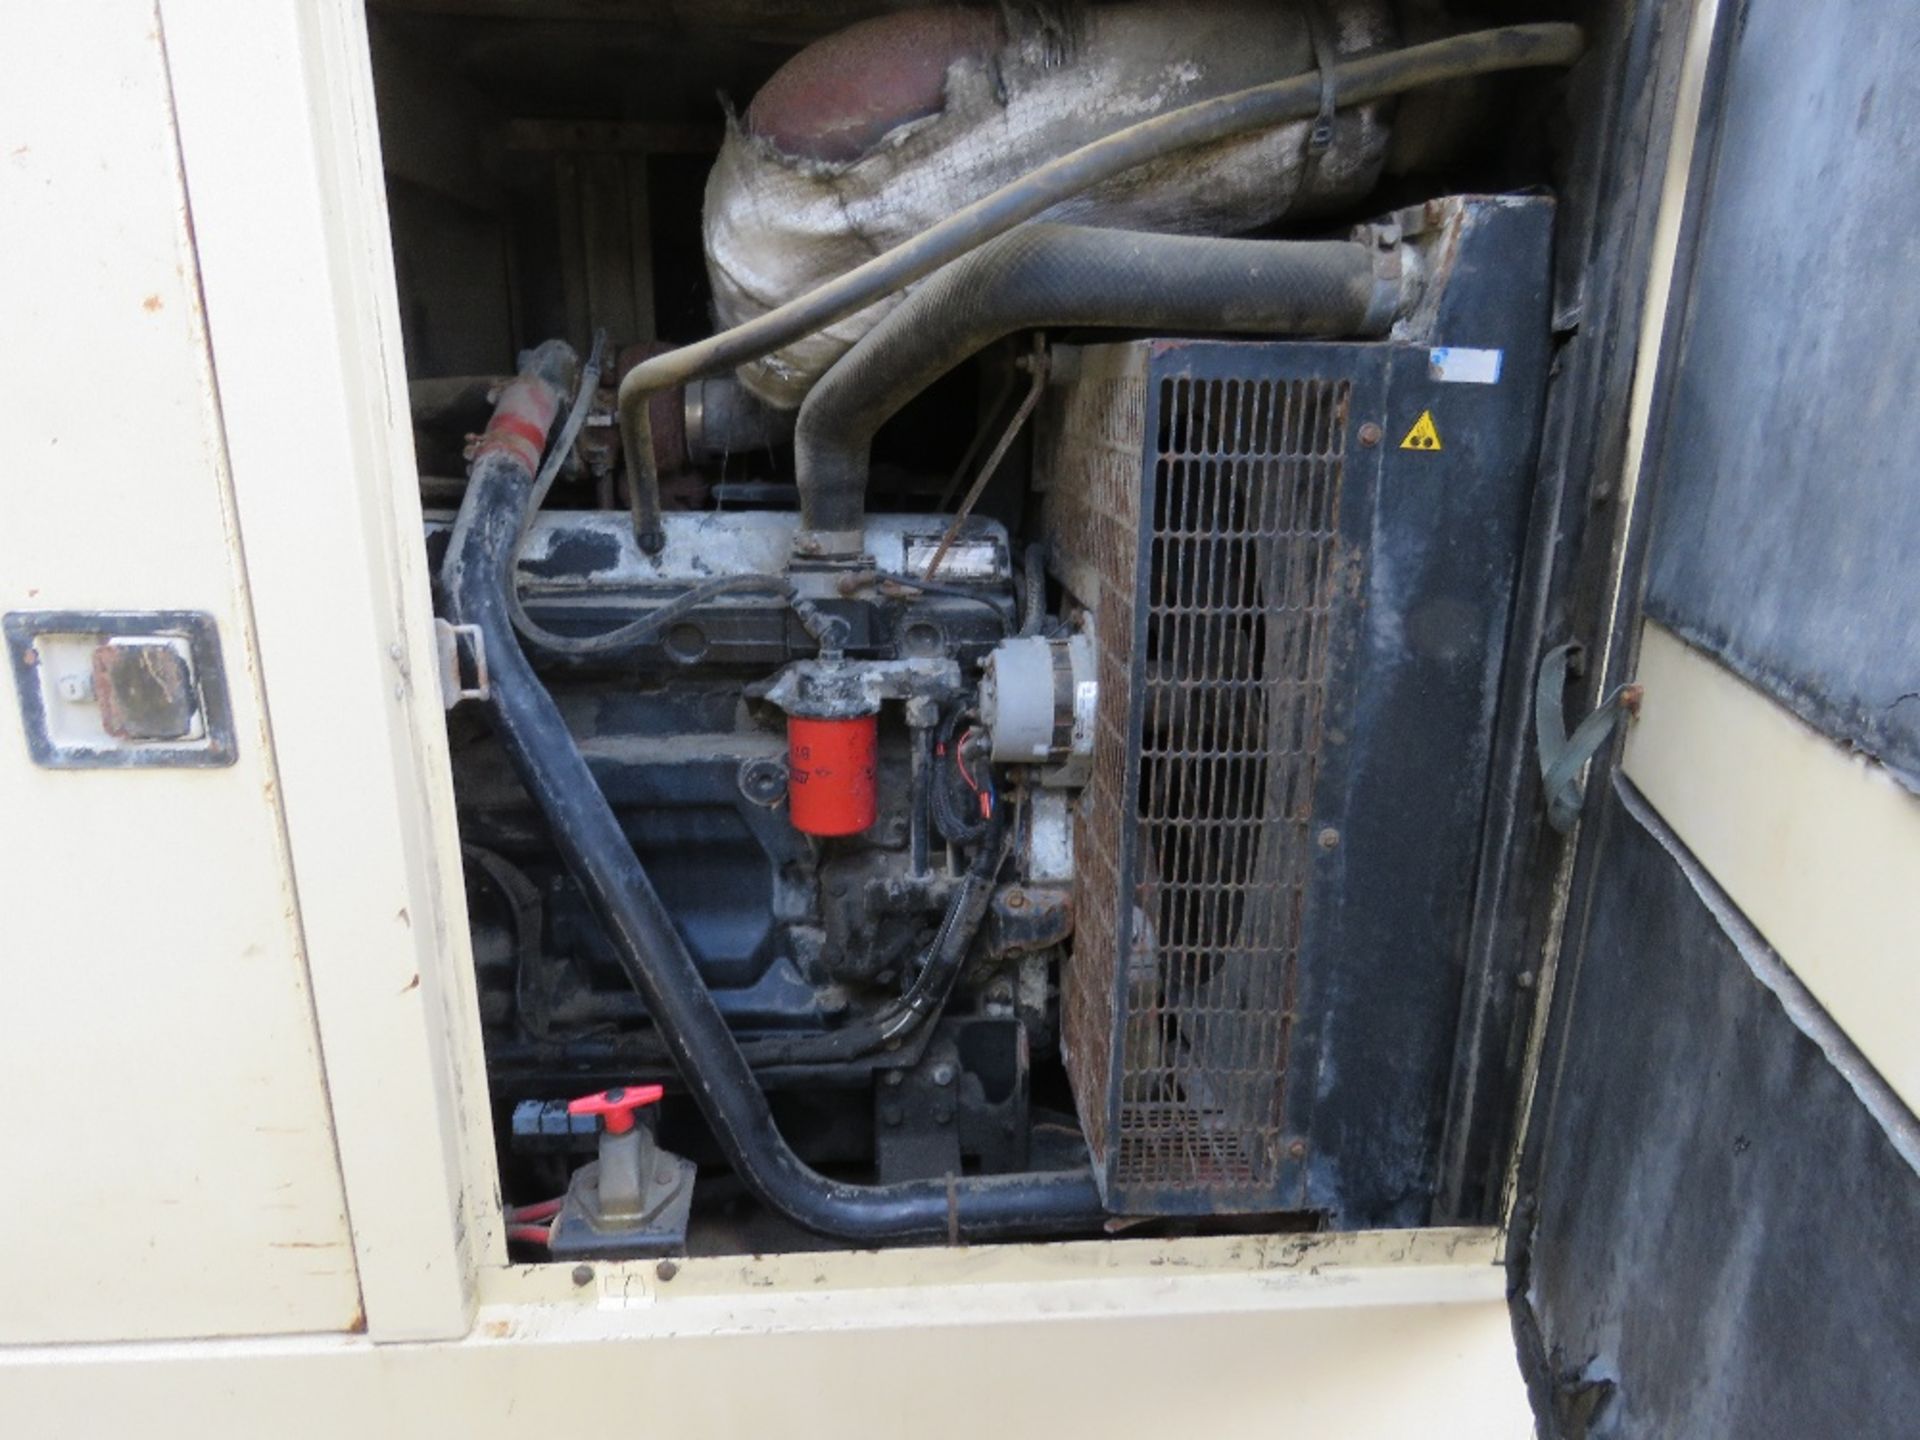 INGERSOLL RAND G200 SKID MOUNTED 200KVA RATED GENERATOR SET WITH JOHN DEERE ENGINE. WHEN TESTED WAS - Image 9 of 9